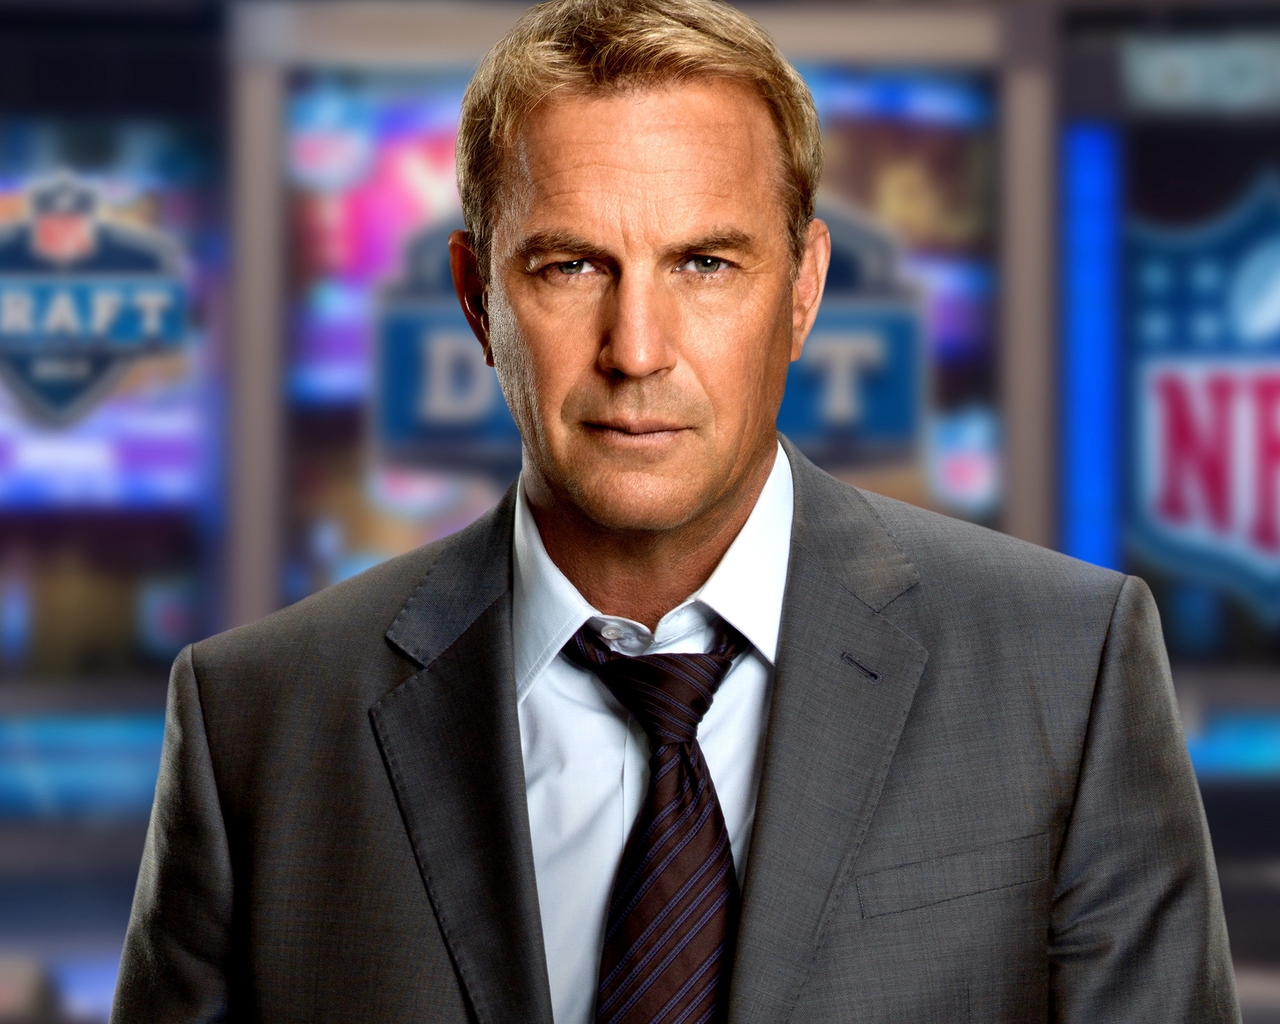 Image: Kevin Costner, Draft Day, actor, man, look, costume